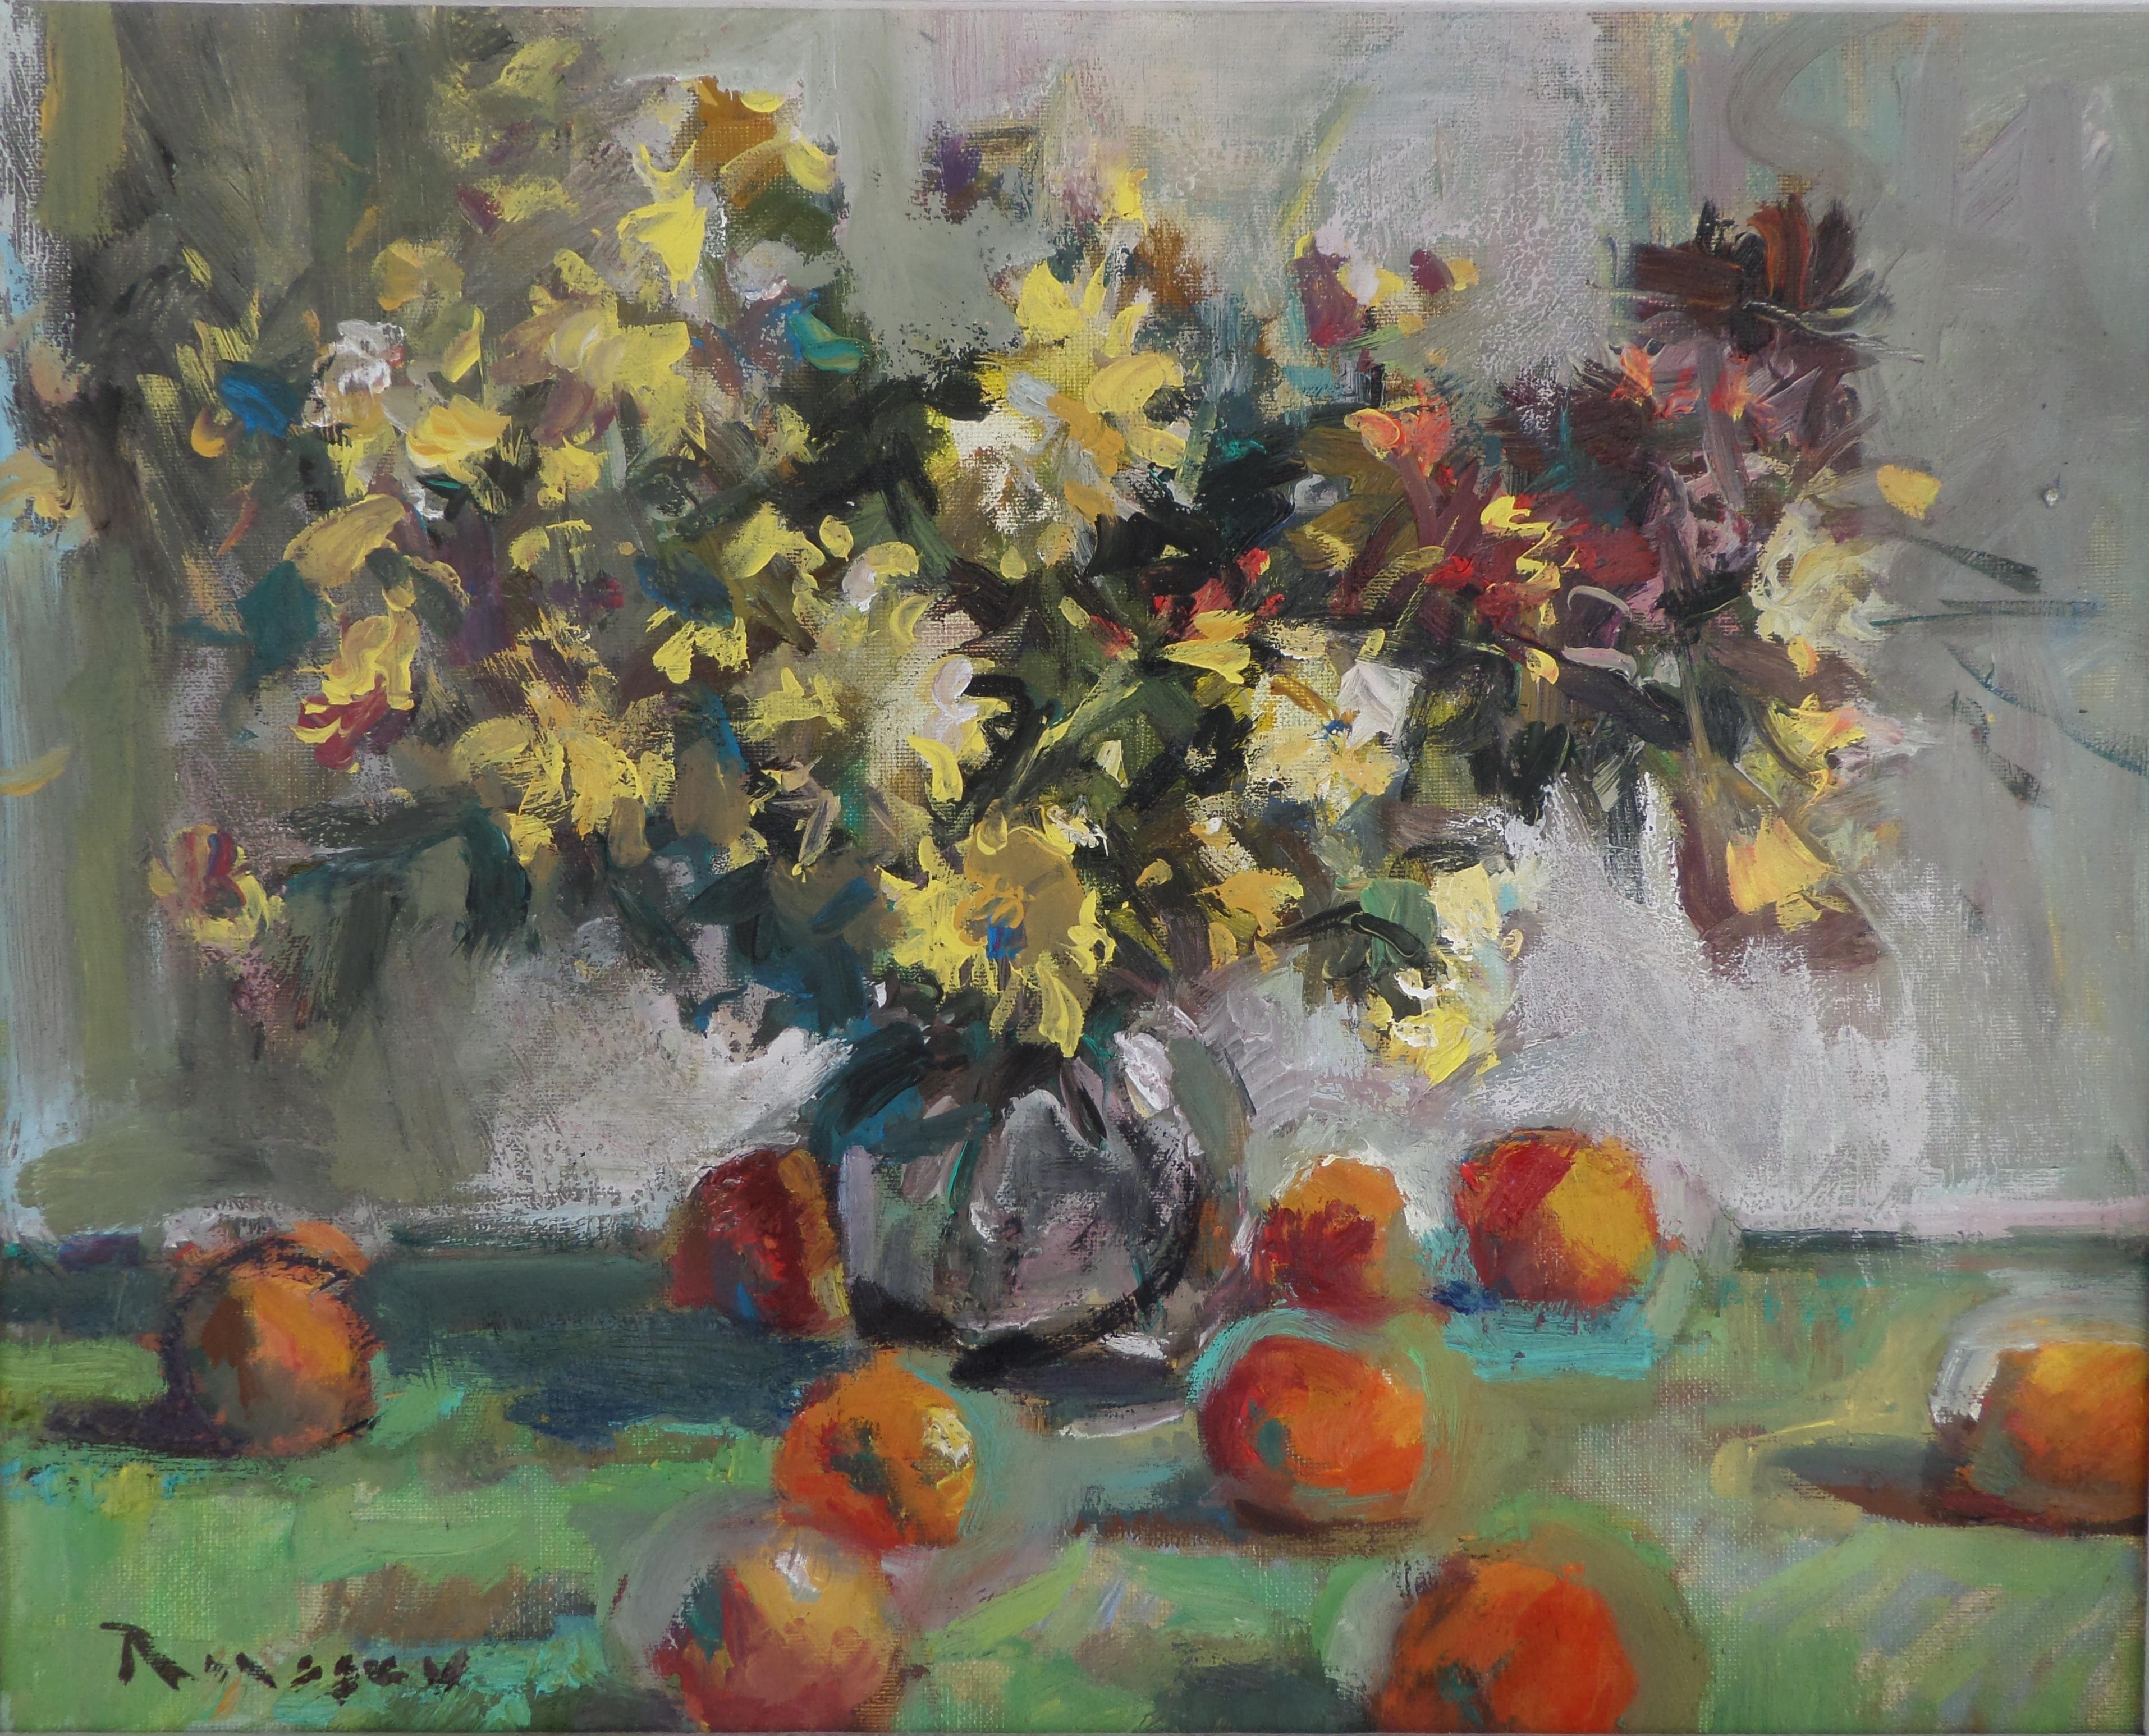 Ivan Roussev Landscape Painting - Flowers And Fruits - Still Life Oil painting Green Red White Yellow Brown Orange